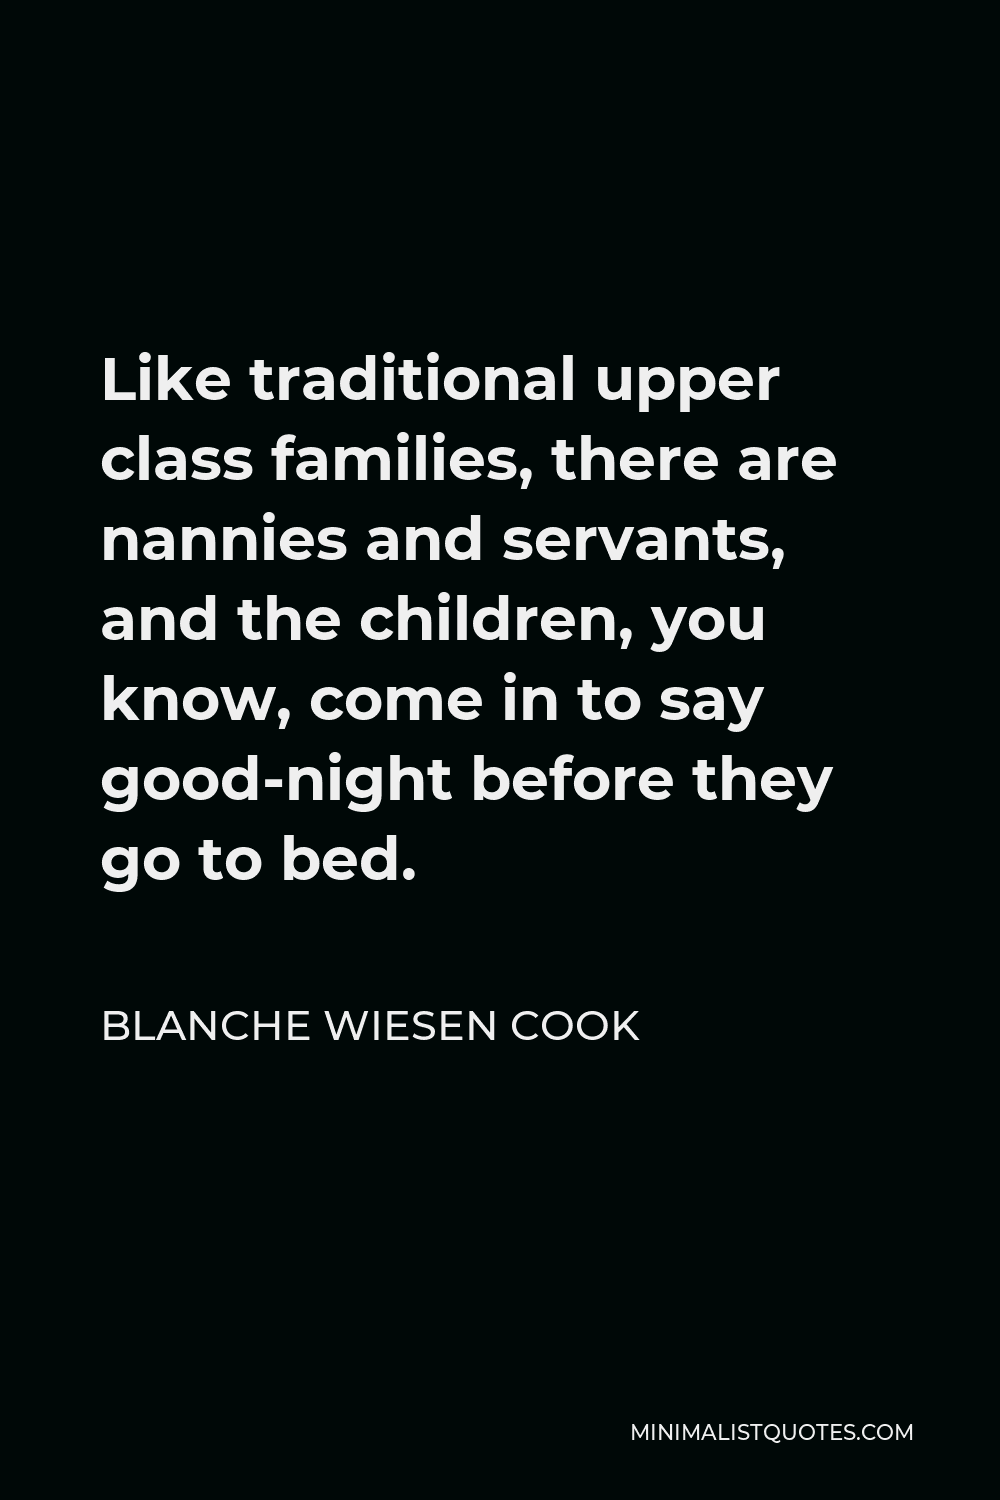 Blanche Wiesen Cook Quote - Like traditional upper class families, there are nannies and servants, and the children, you know, come in to say good-night before they go to bed.